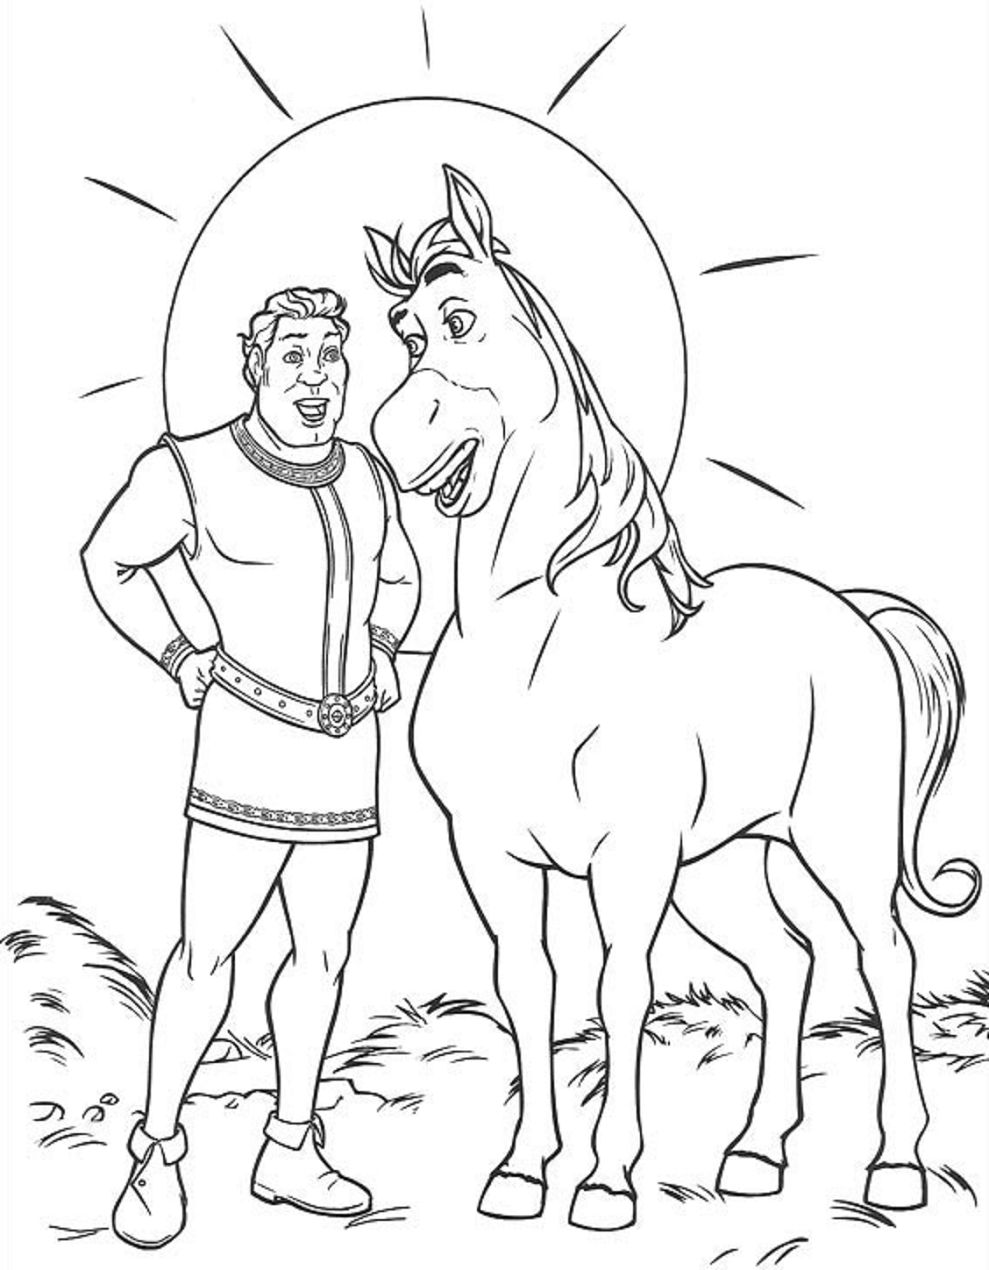 Shrek Talking With Donkey Coloring Page Free Printable Coloring Pages For Kids